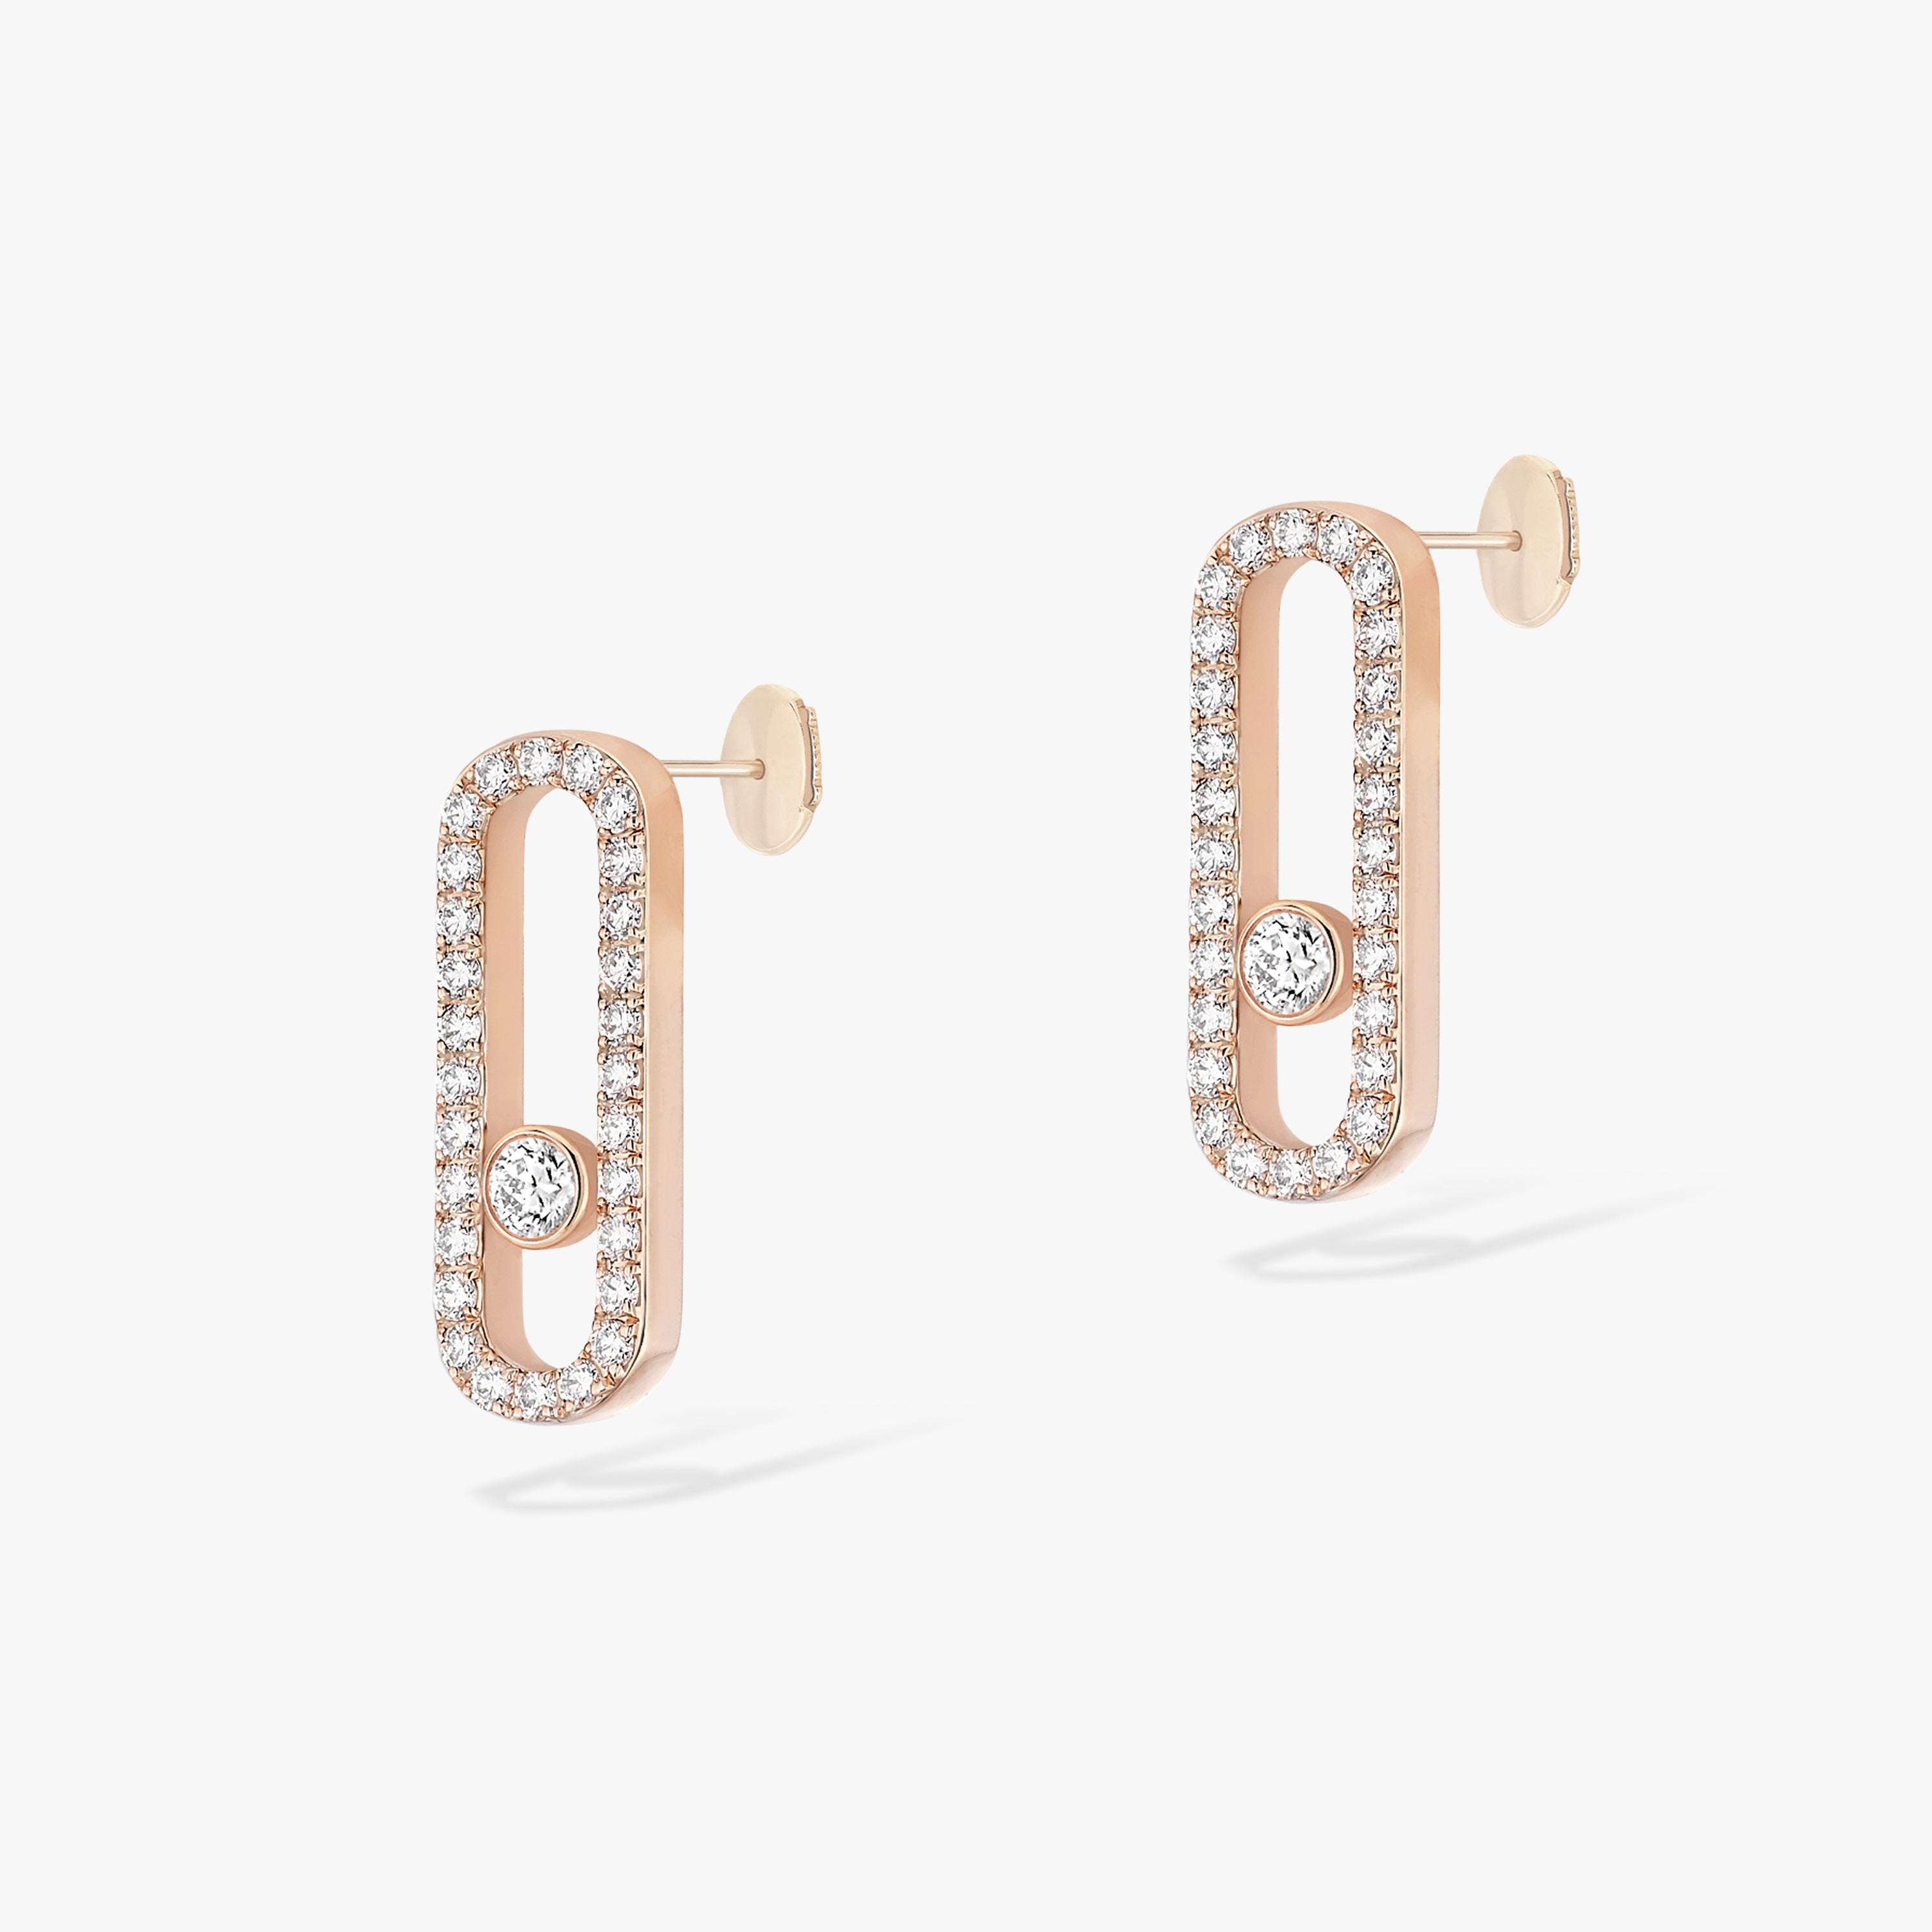 Move Uno Earrings by Messika